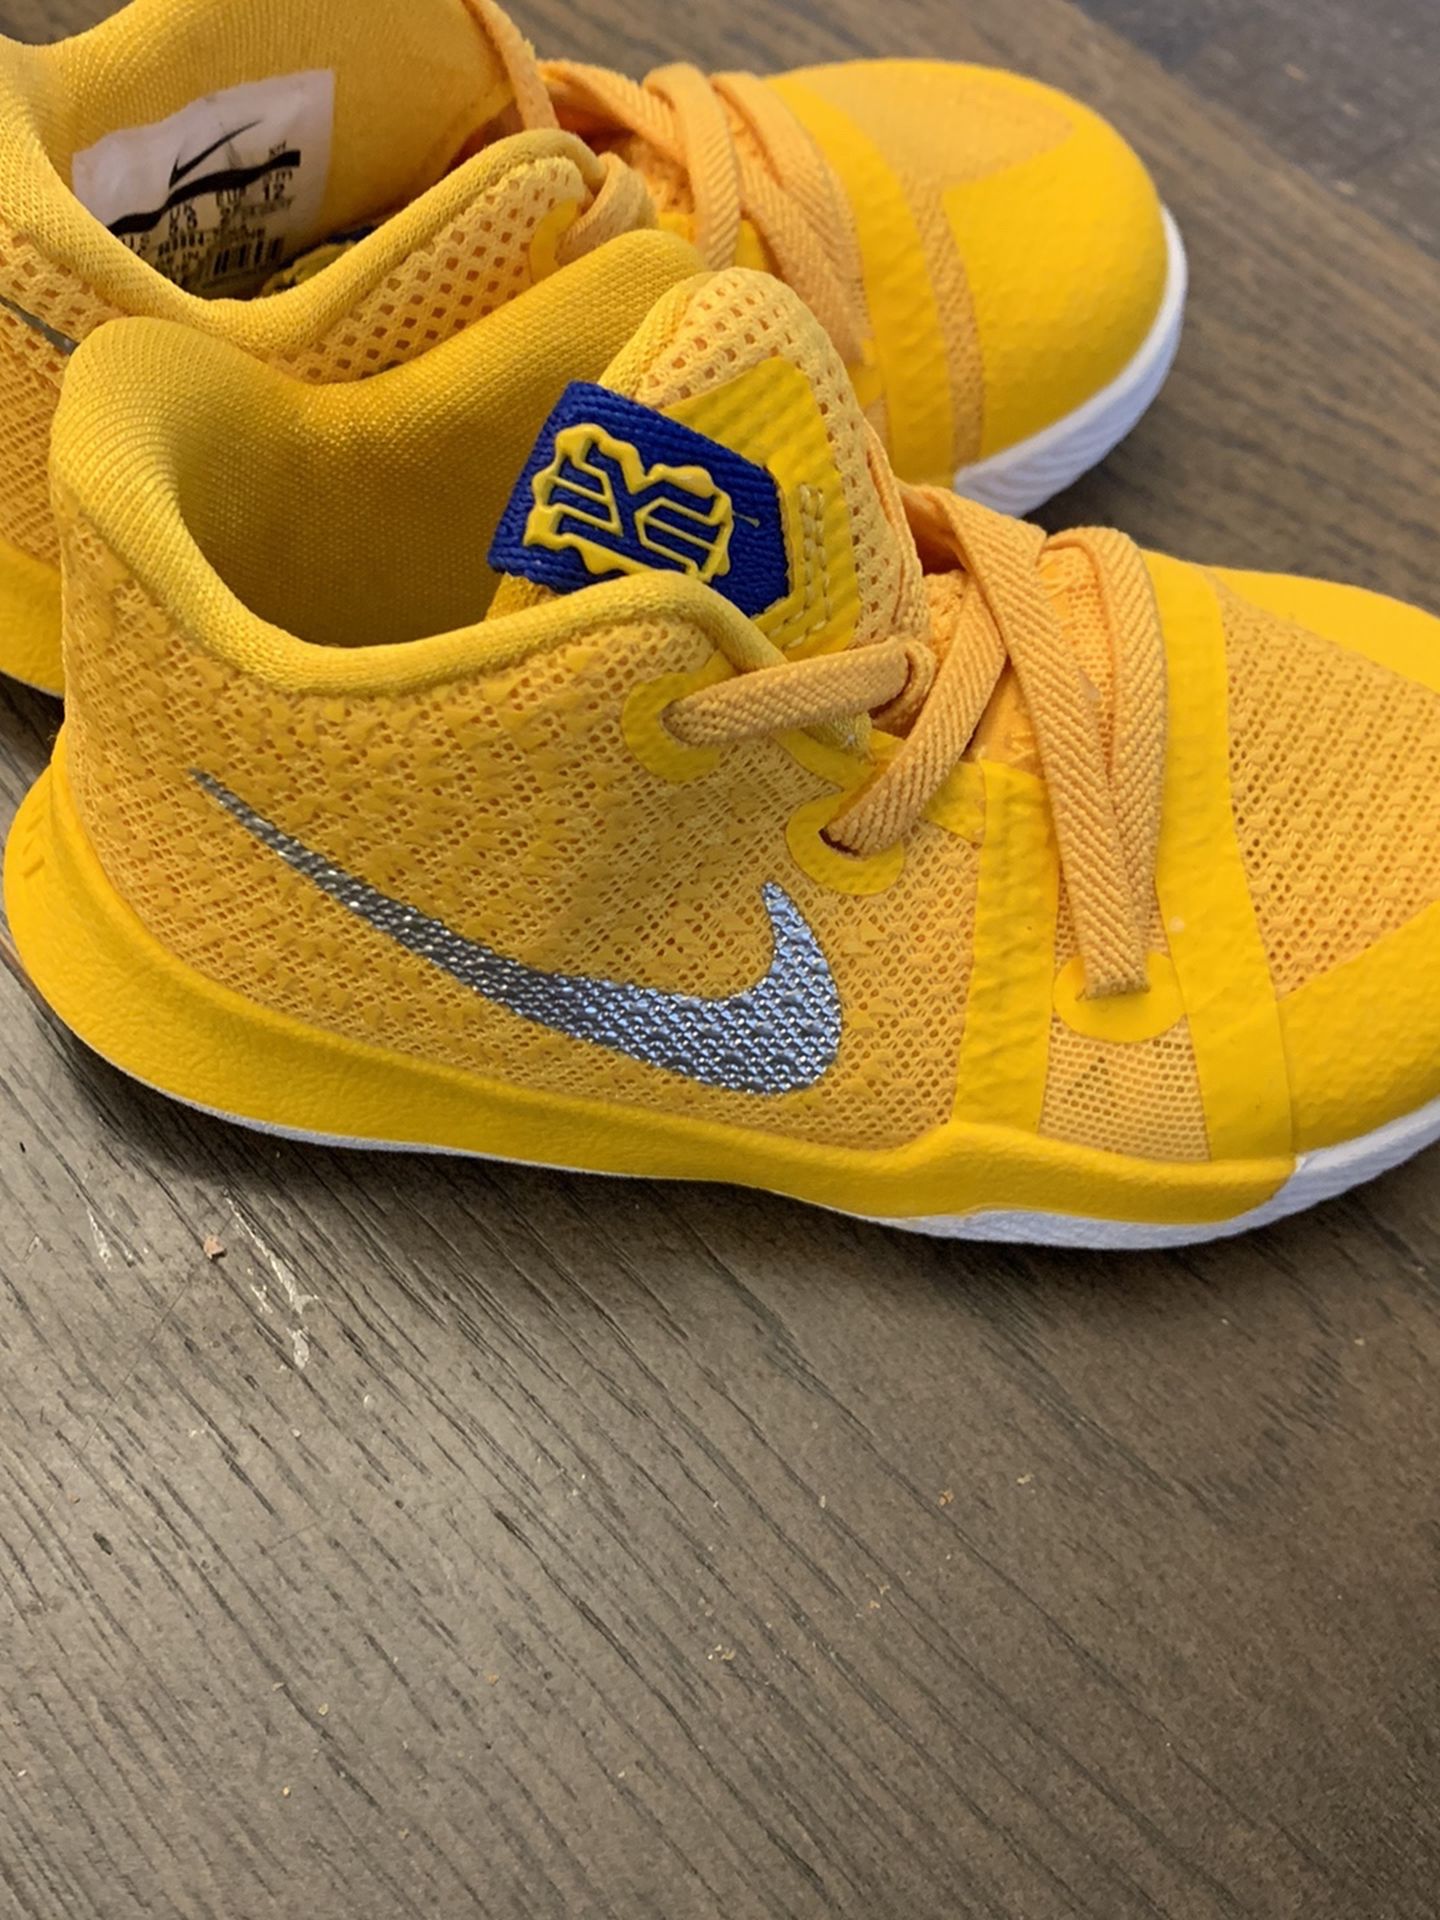 Toddler’s Kevin Durant (KD) 6C